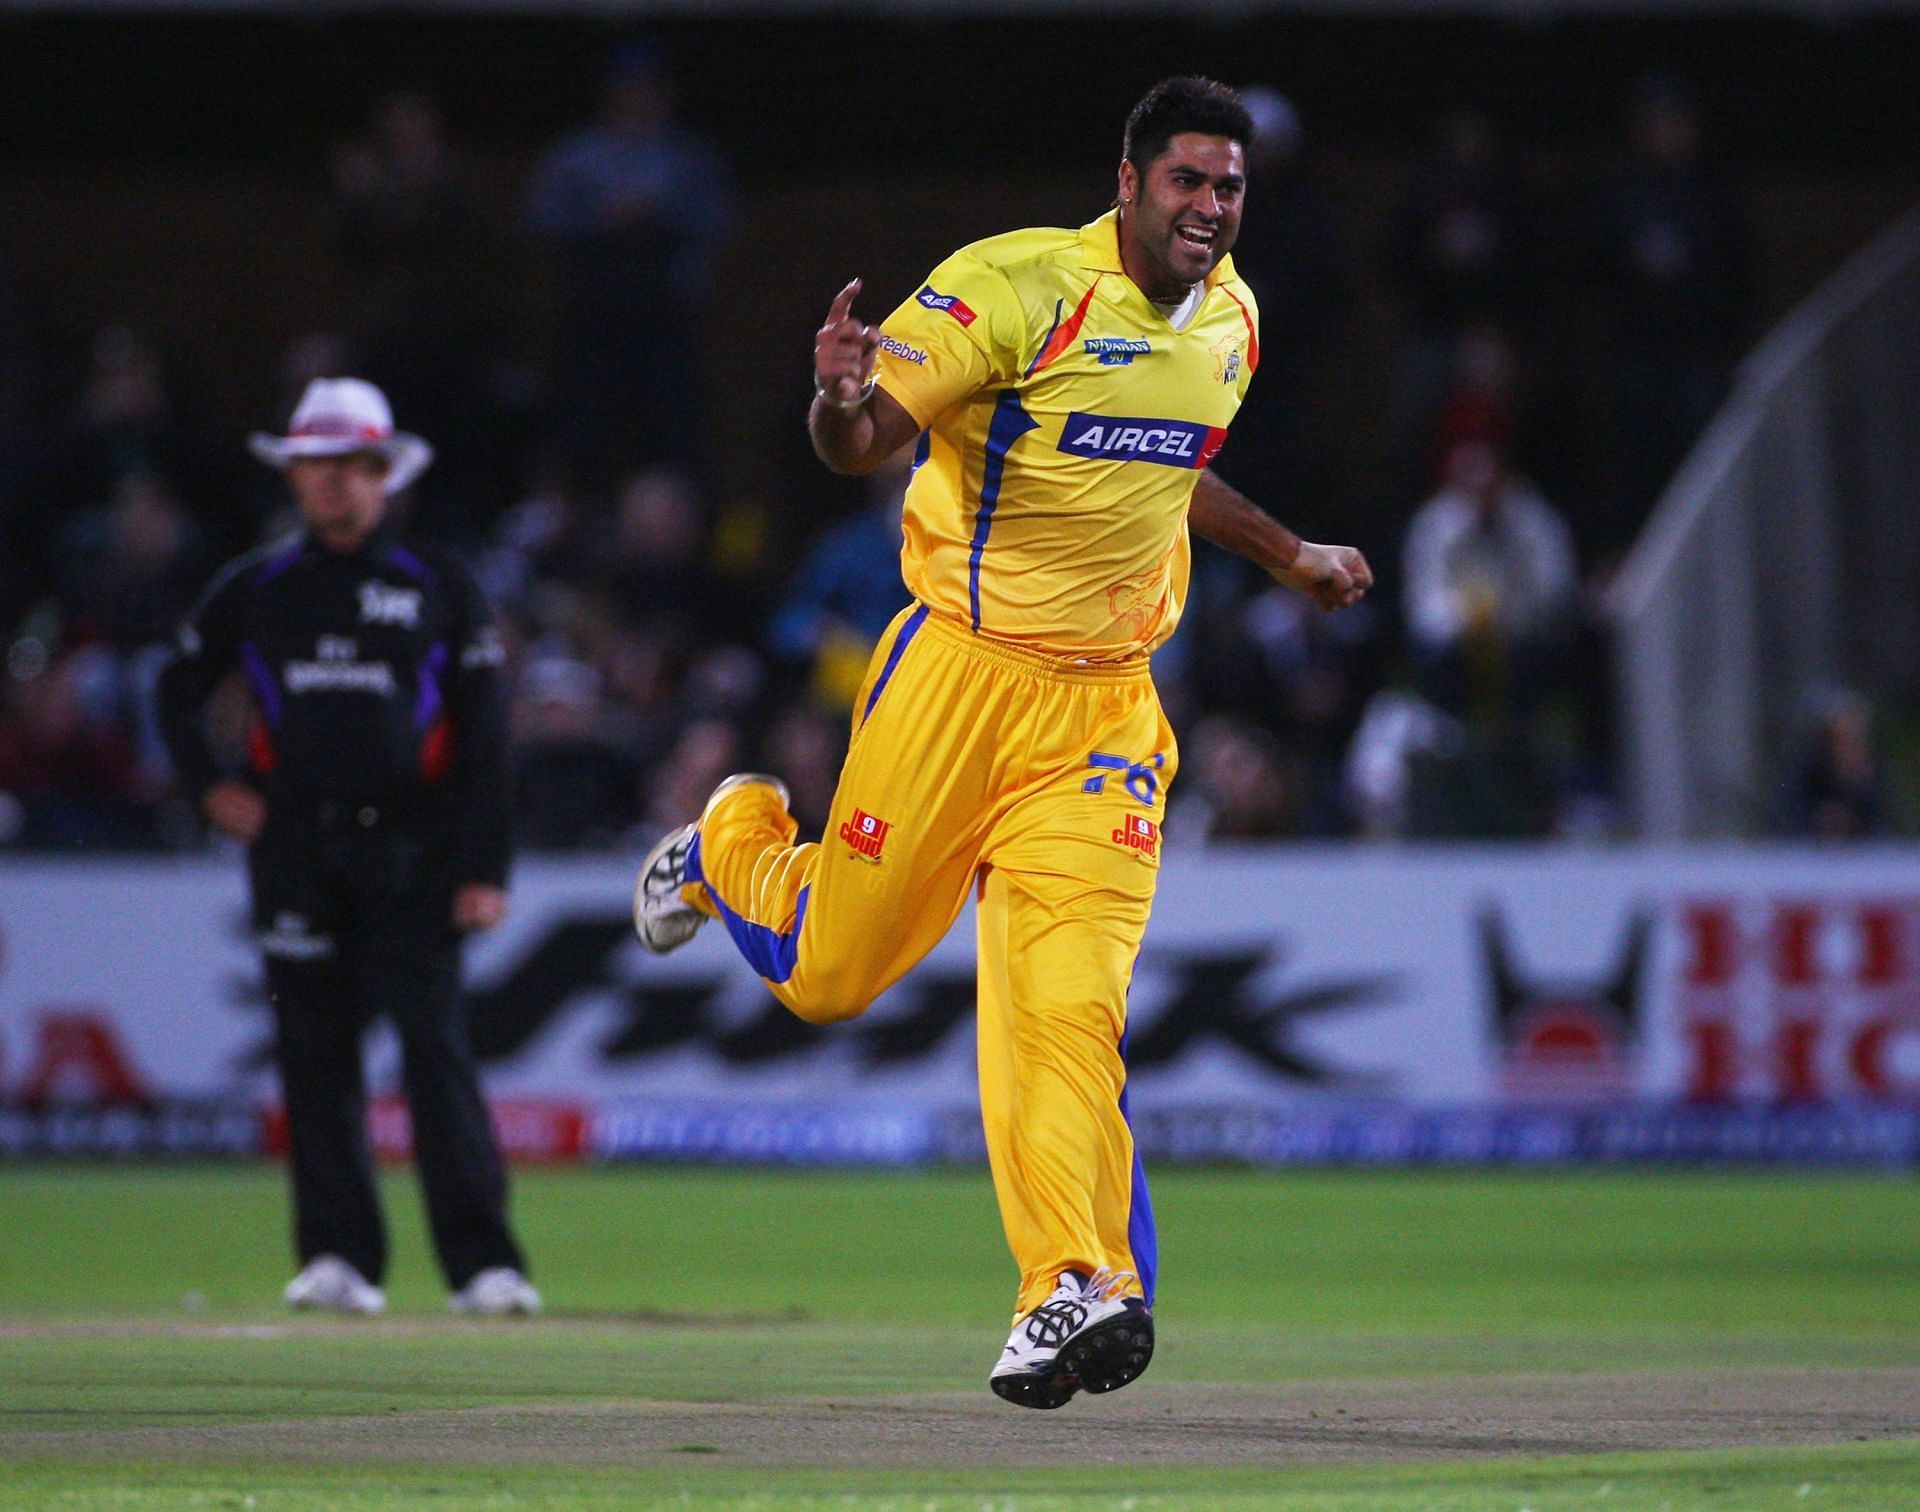 Manpreet Gony was an immediate impact for CSK in the inaugural edition of IPL.